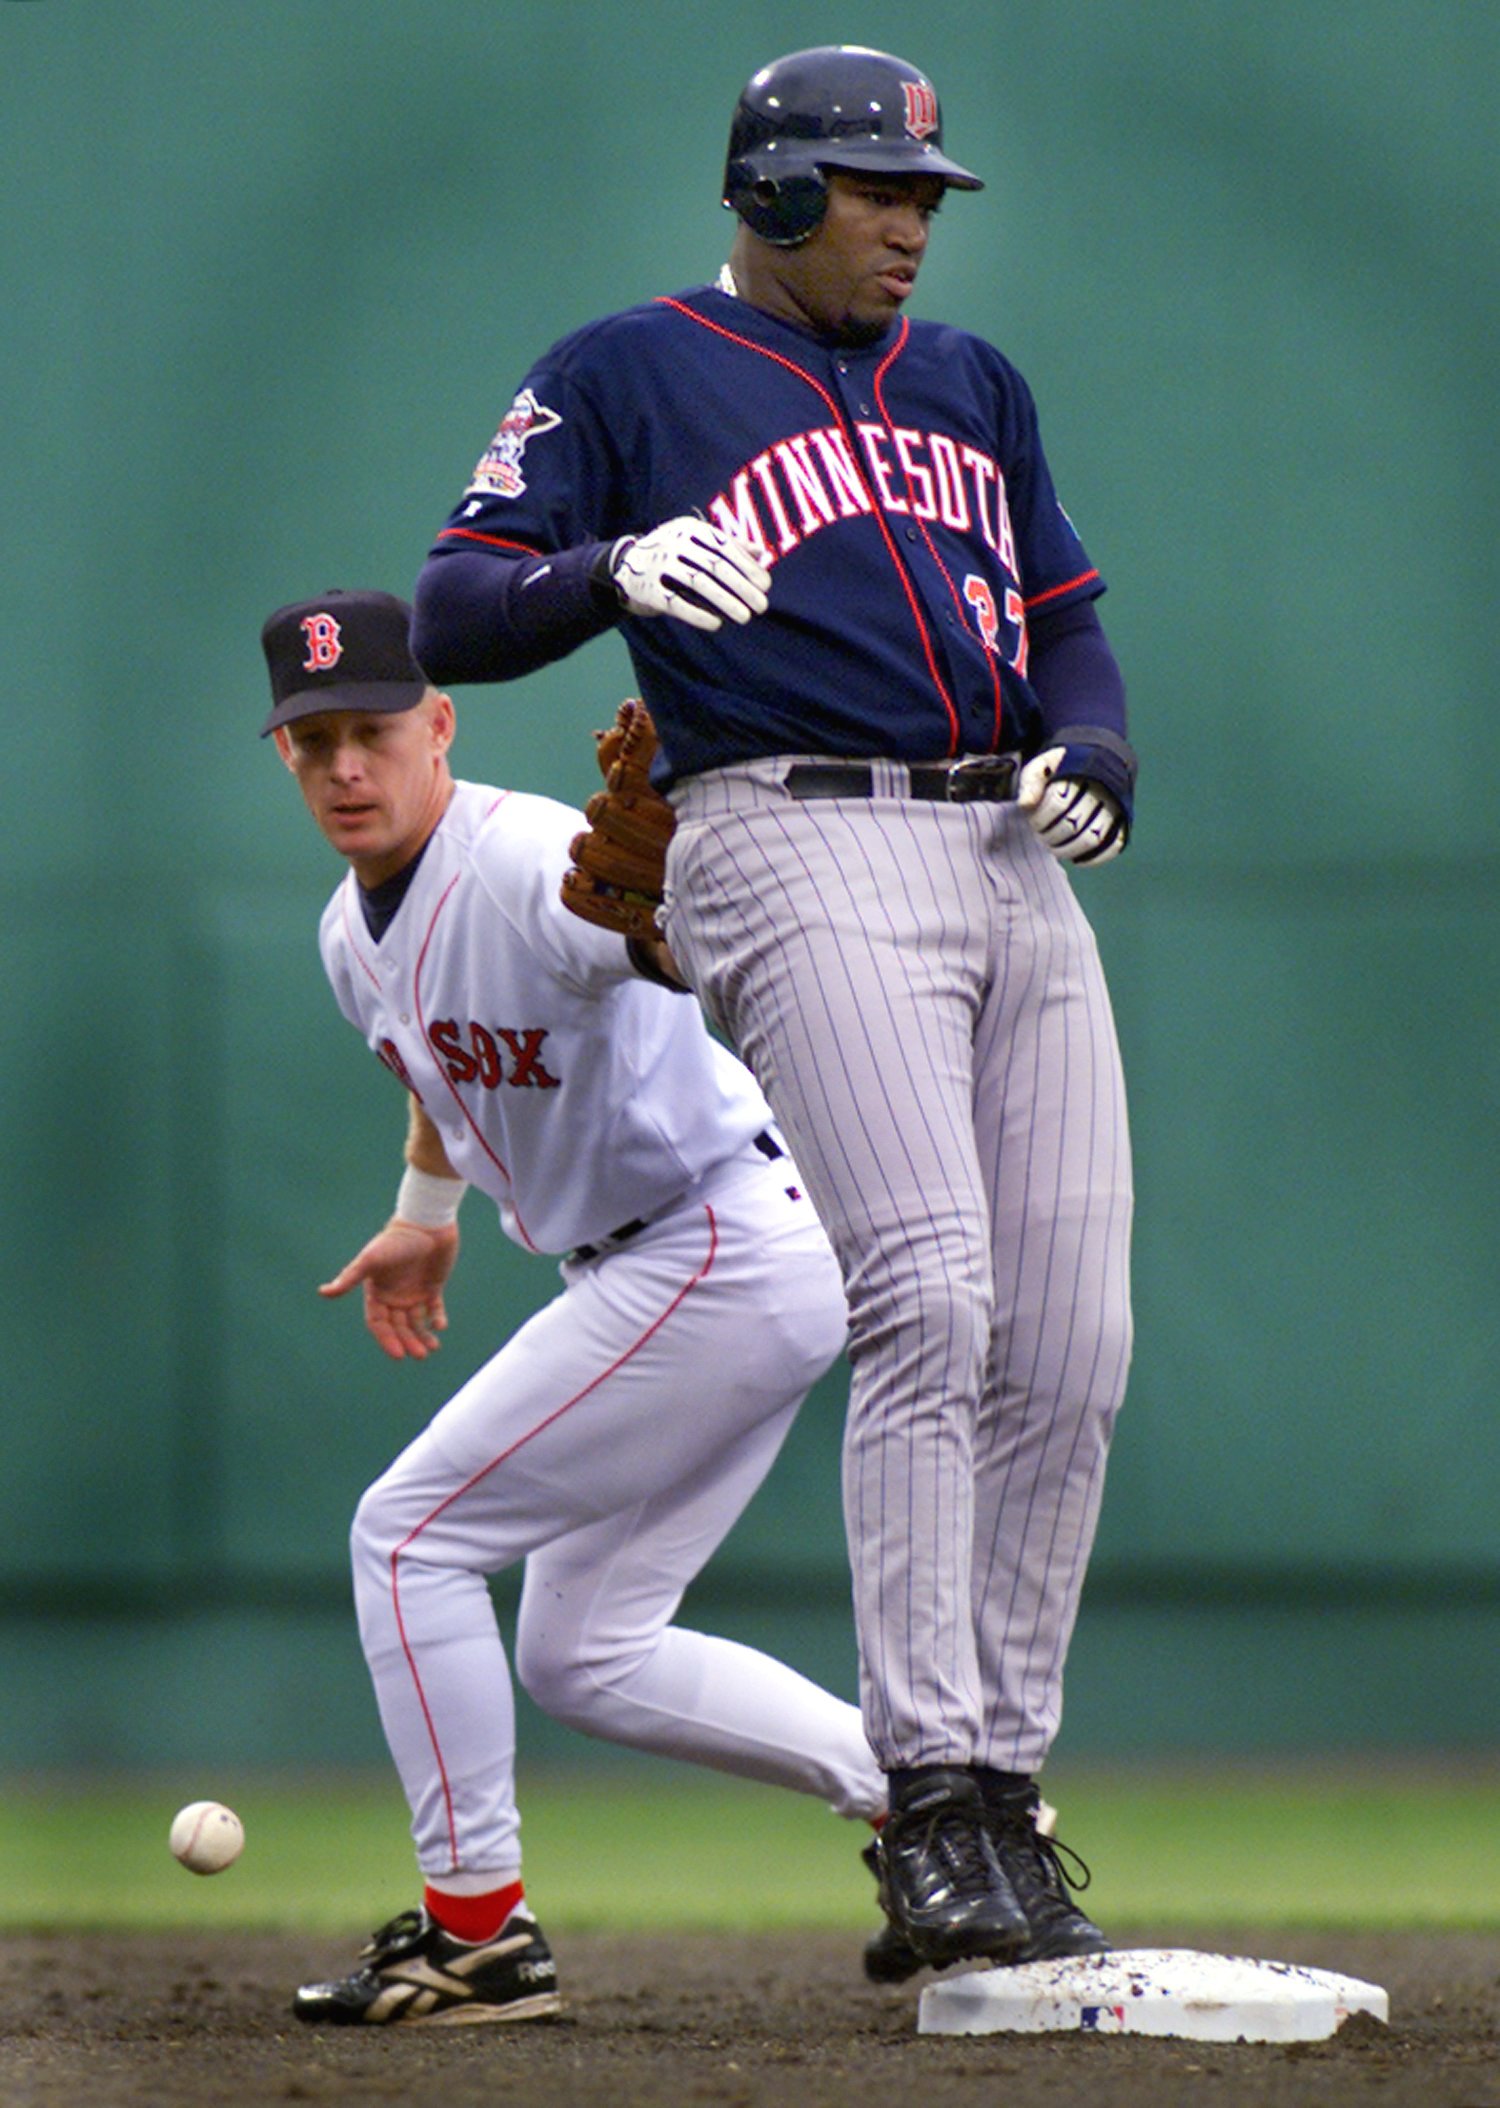 During a 2000 game, Red Sox second baseman Jeff Frye loses the ball while trying to lay a tag on Ortiz.